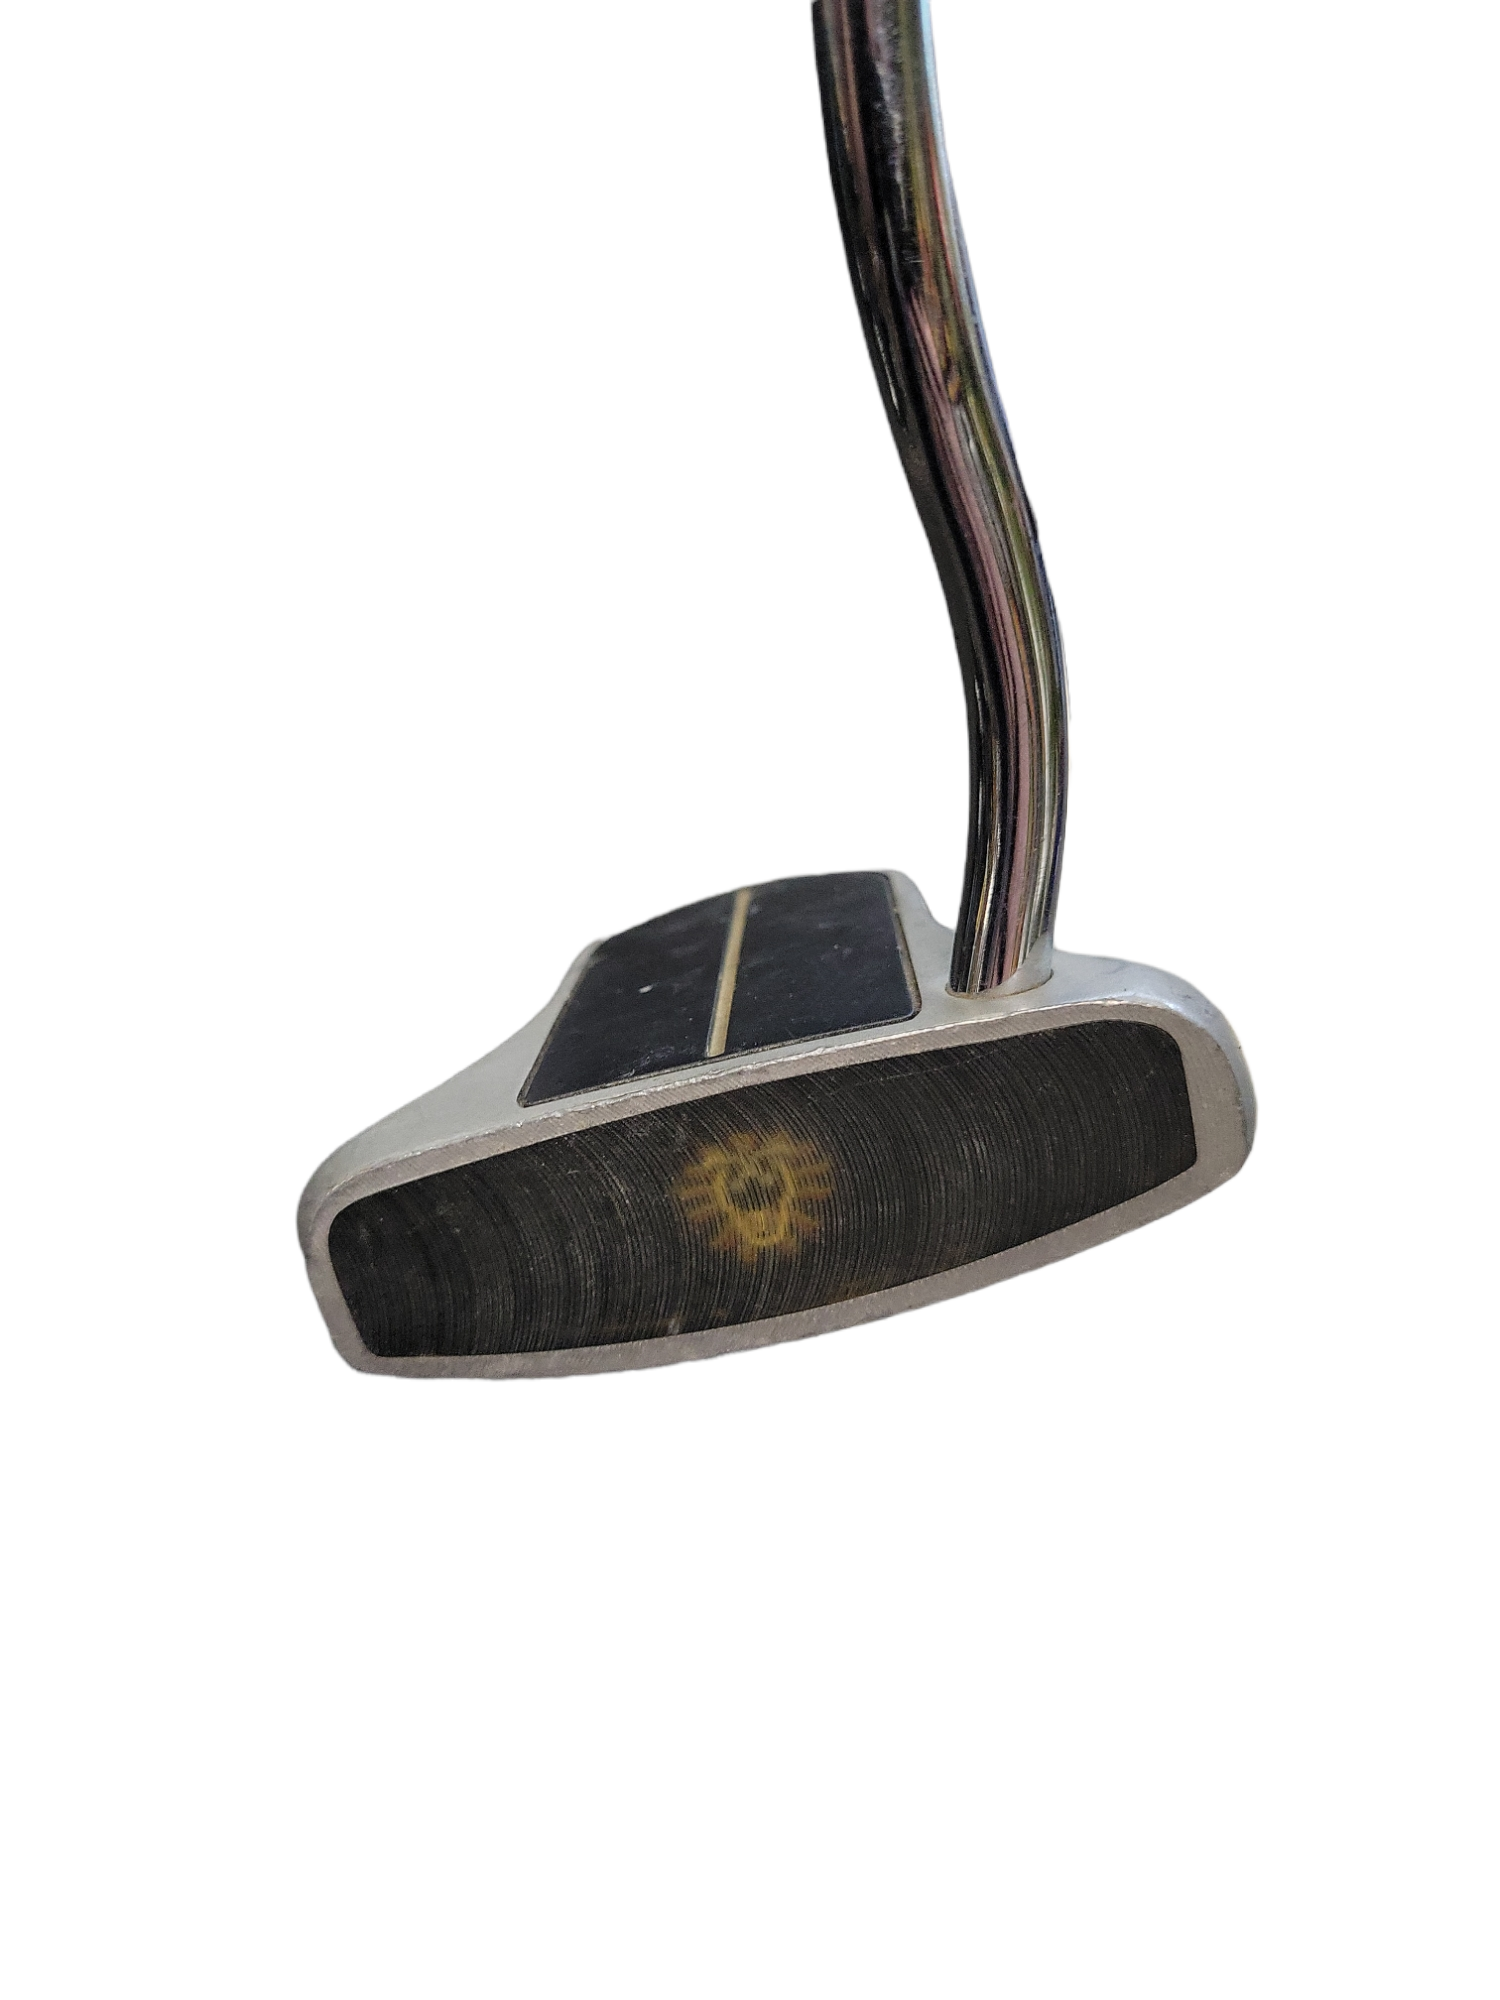 Used JOHN DALY PUTTER Mallet Putters Putters